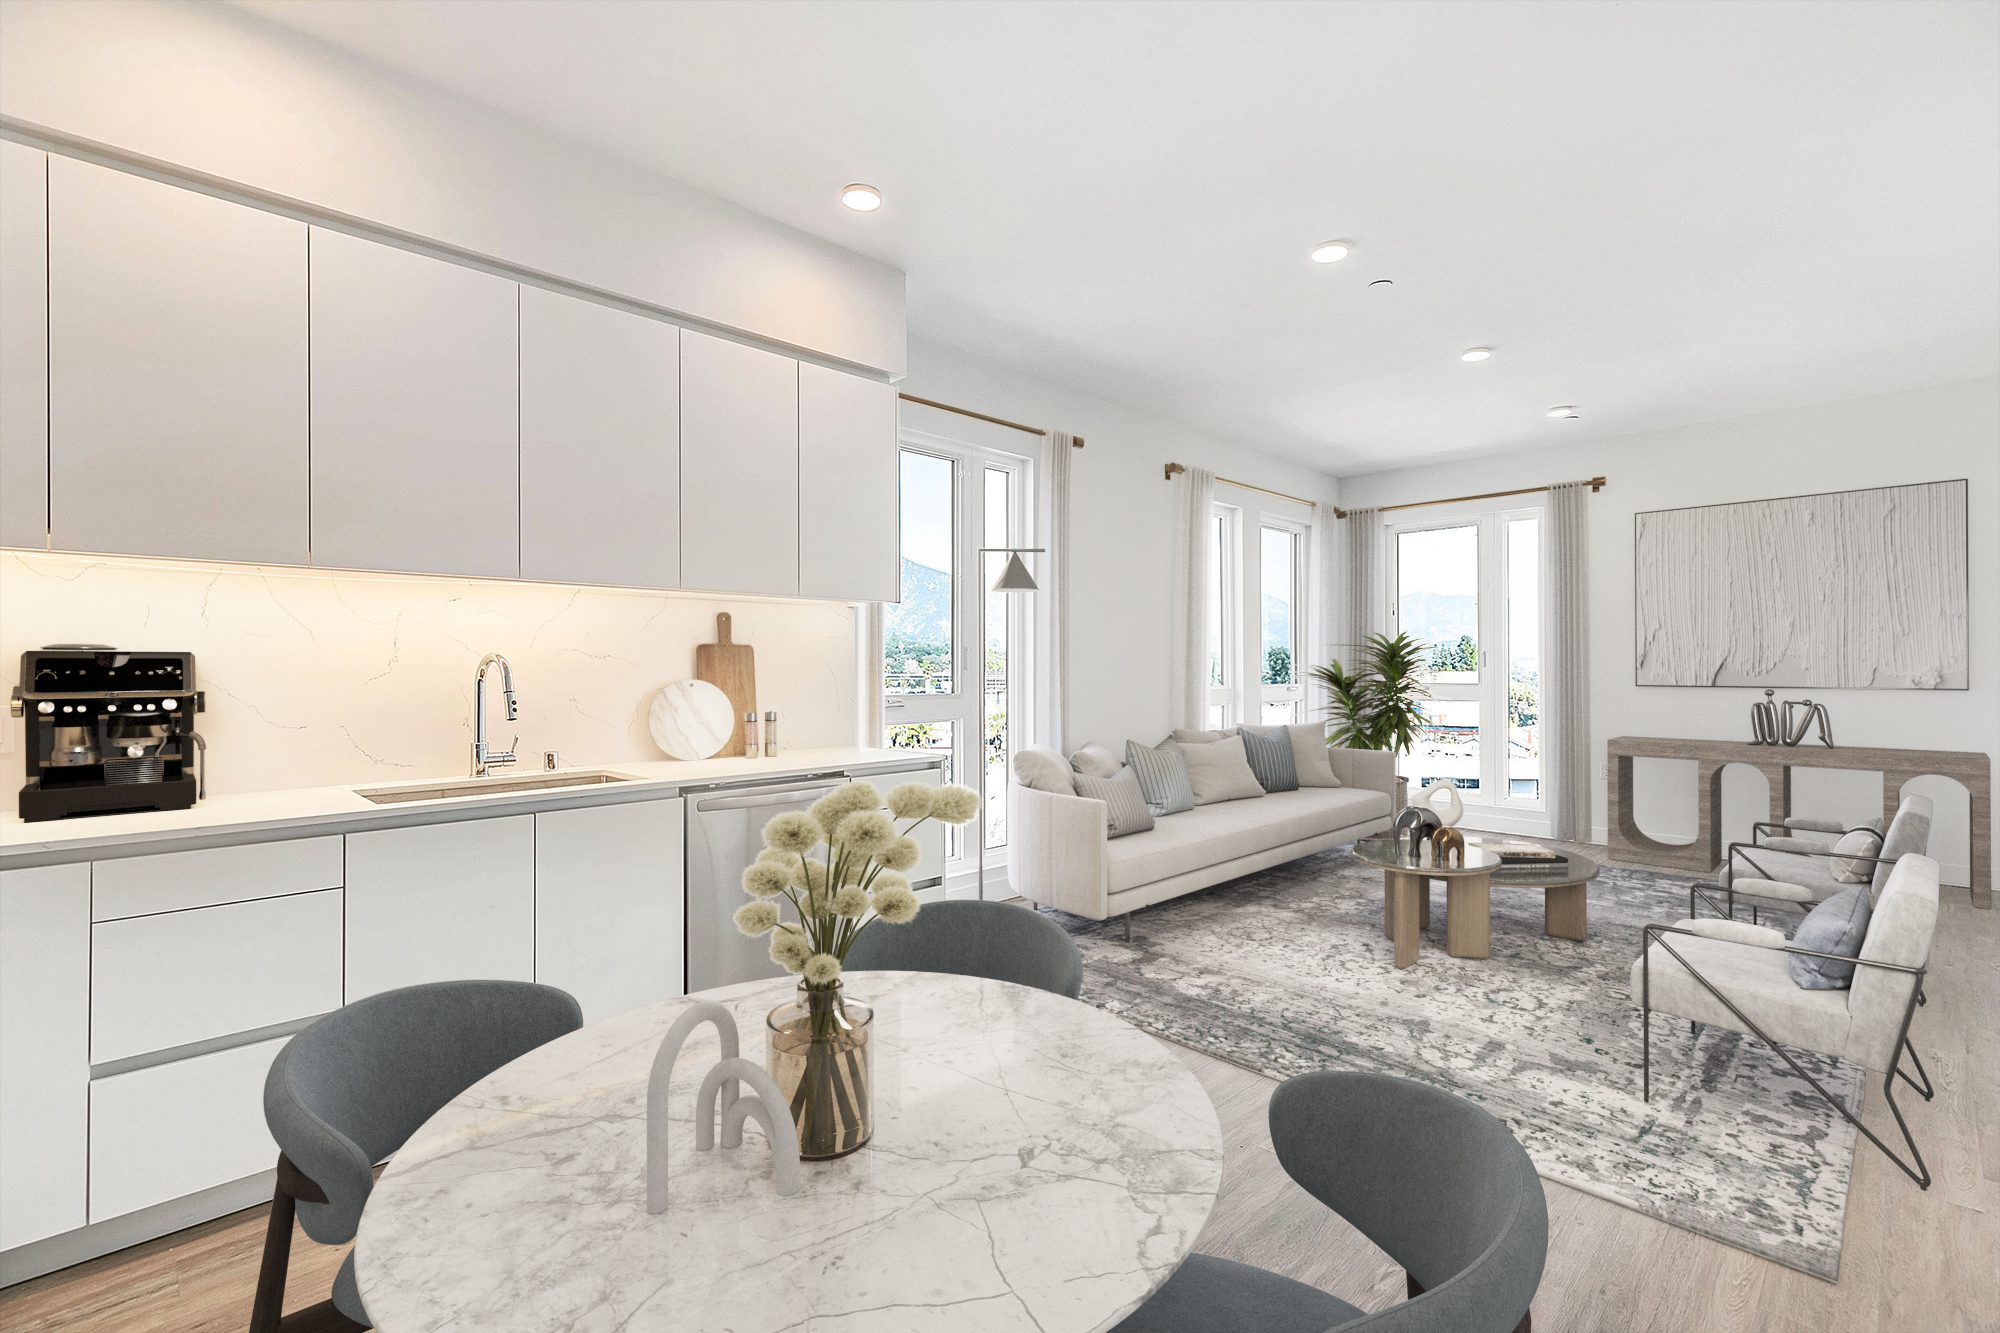 A rendering of The Rinrose's modern kitchen and dining area.